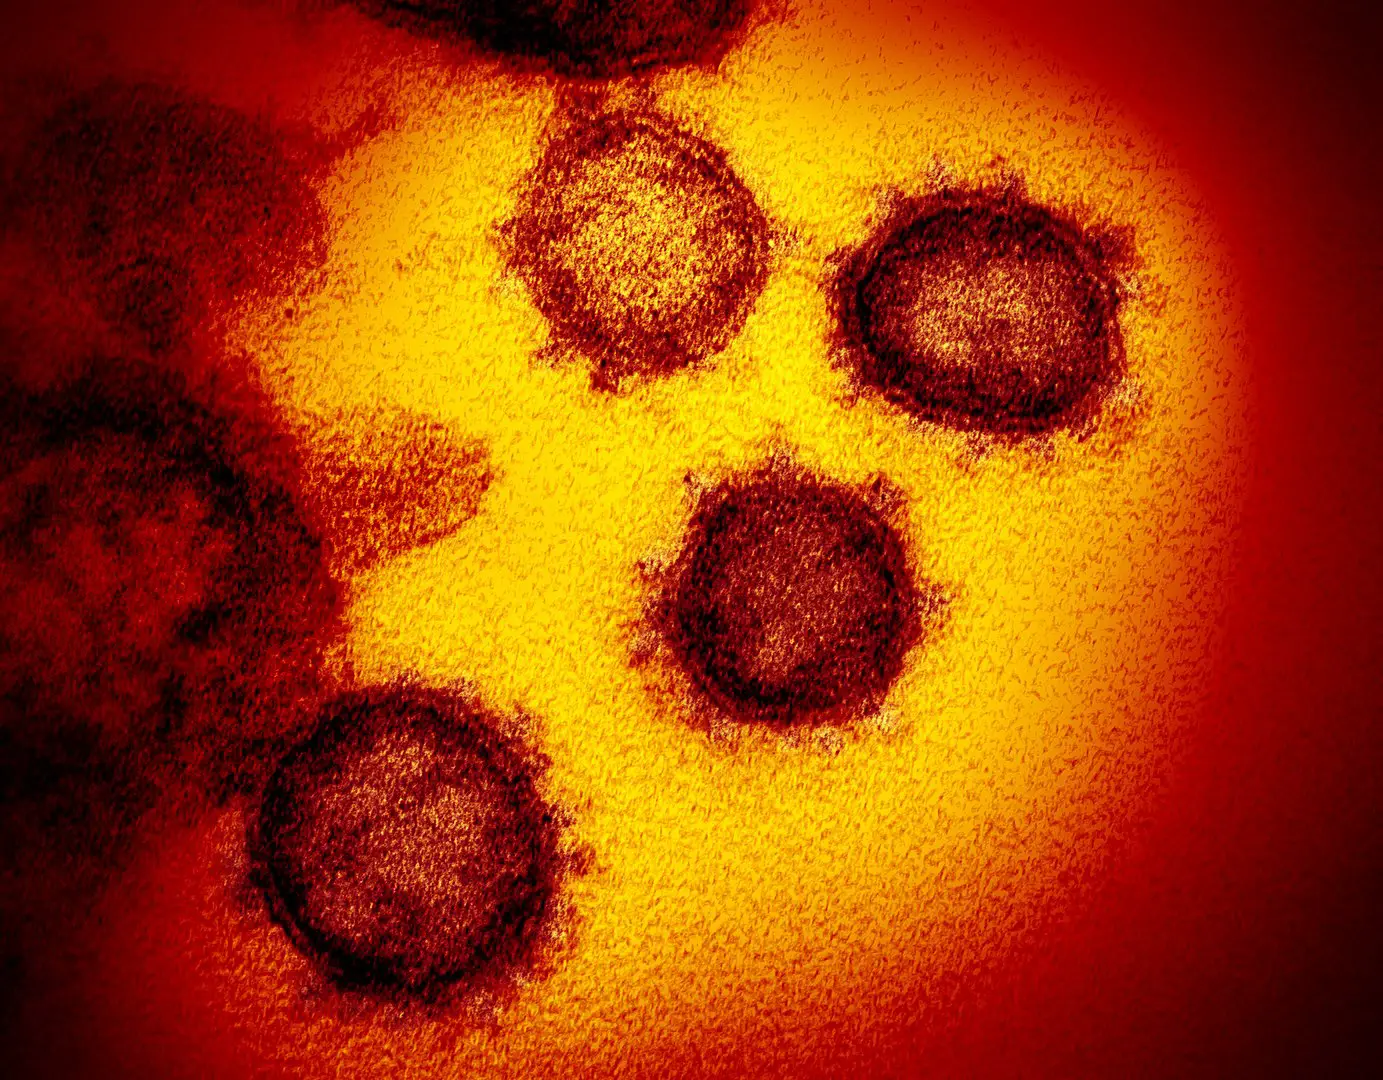 Novel Coronavirus SARS-CoV-2 TEM image, also known as the virus Covid 19 by NIAID - https://www.flickr.com/photos/niaid/49530315718, CC BY 2.0, https://commons.wikimedia.org/w/index.php?curid=87026581